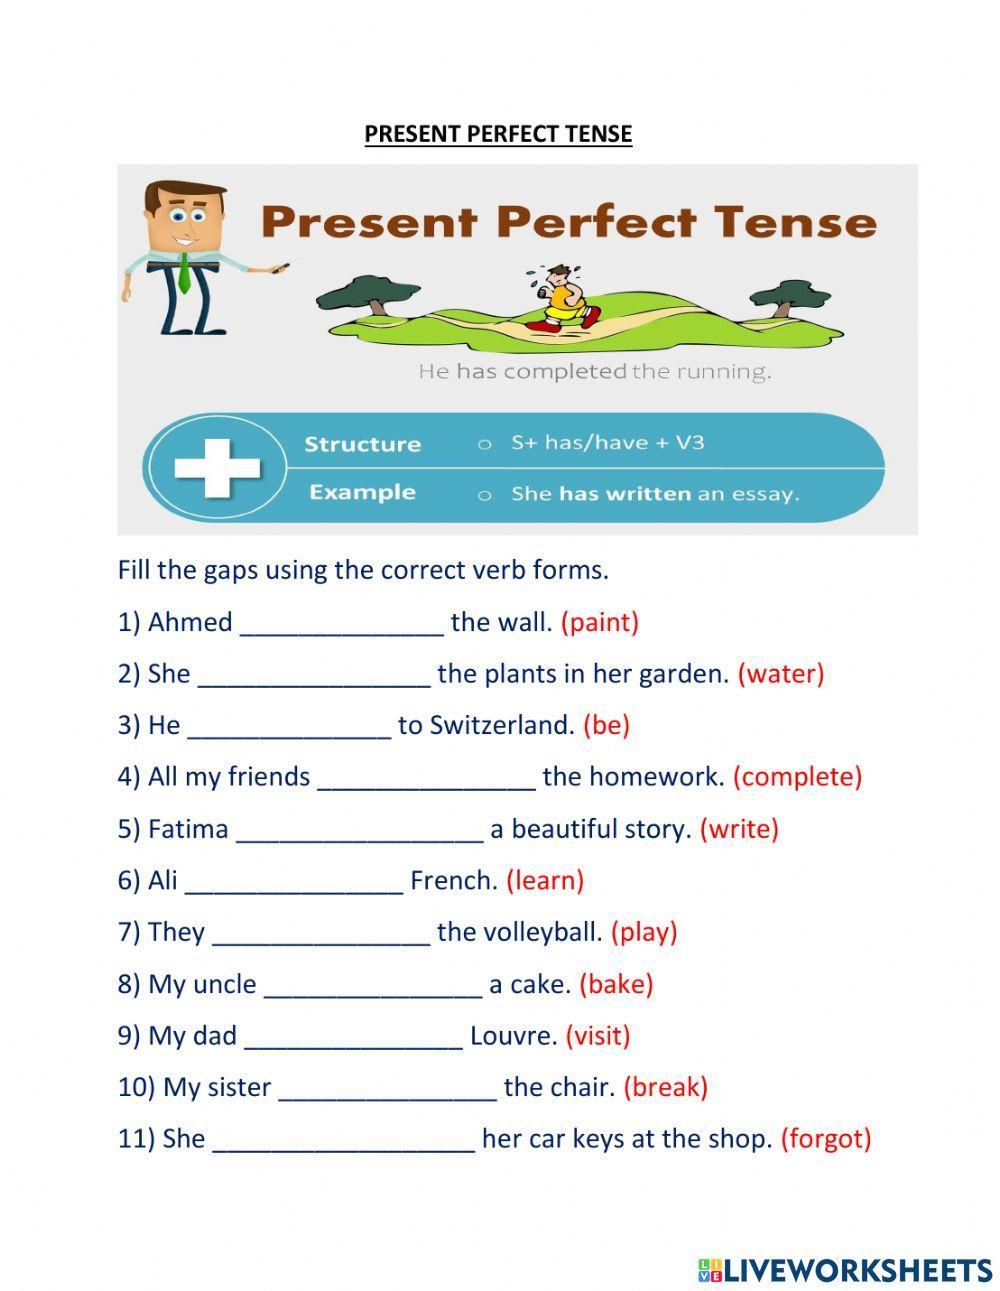 Present Perfect Tense Online Exercise For Grade 6 Live Worksheets